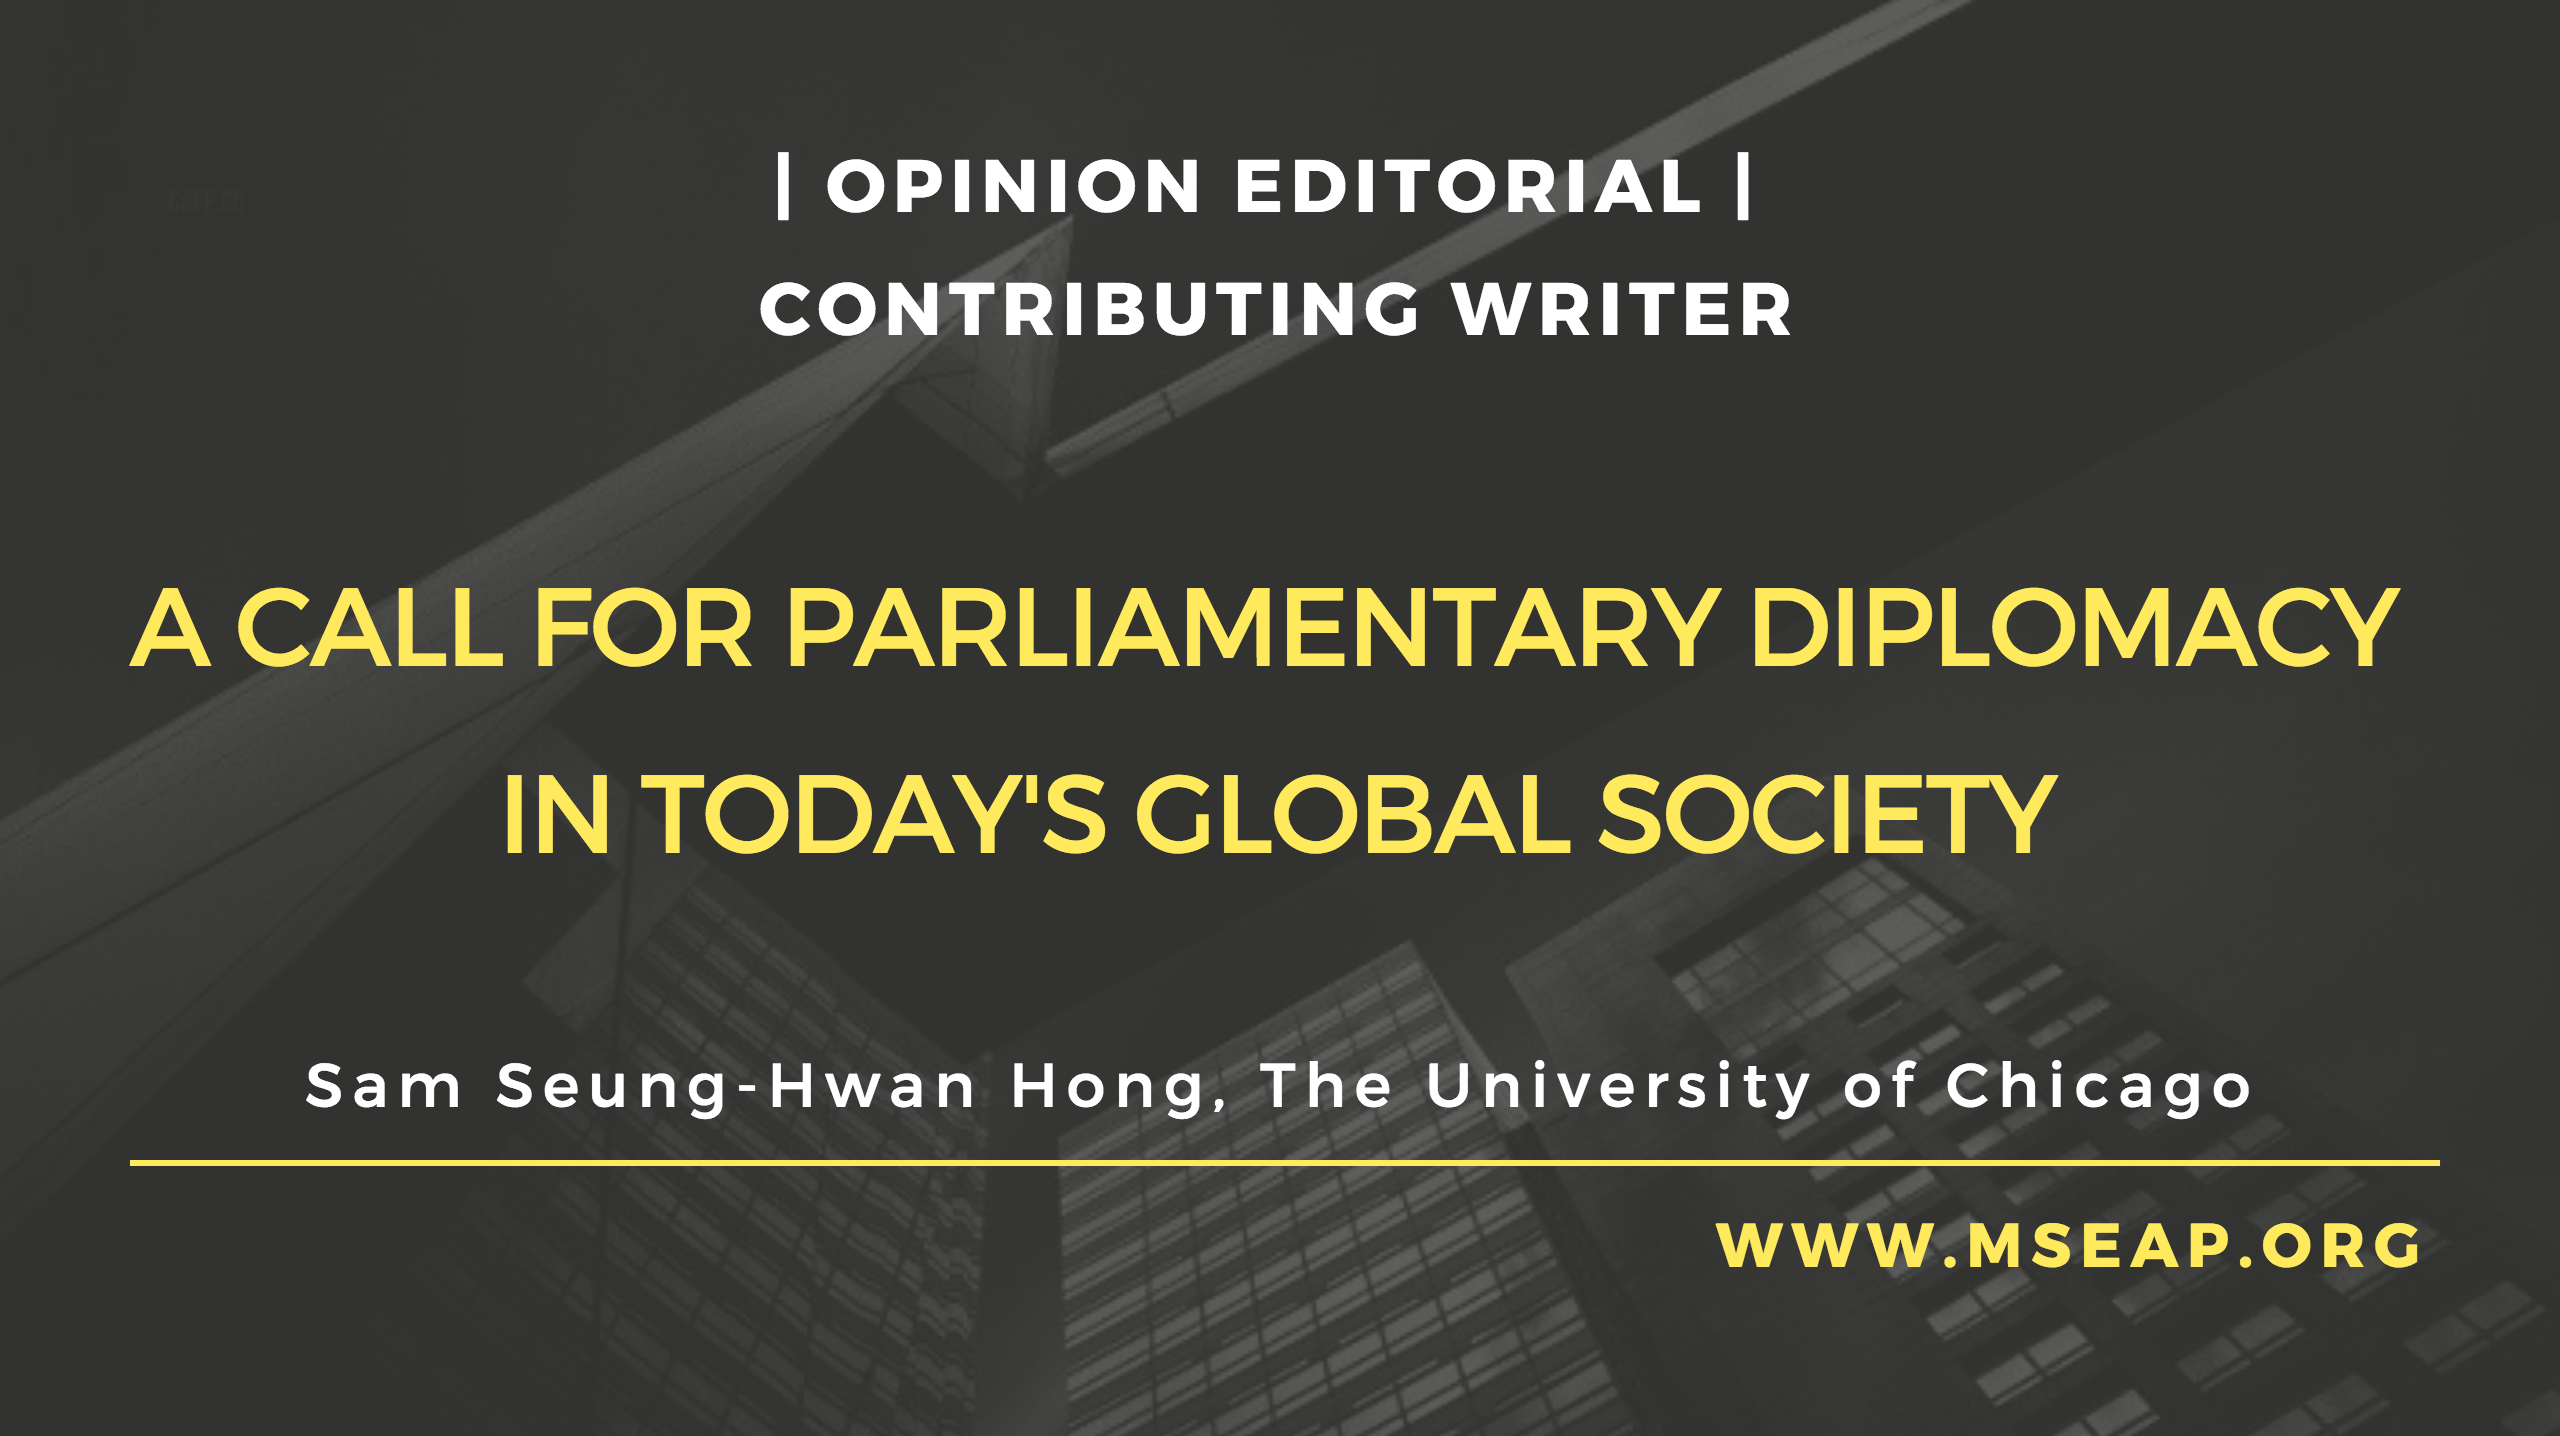 [Opinion Editorial] A call for parliamentary diplomacy in today's global society